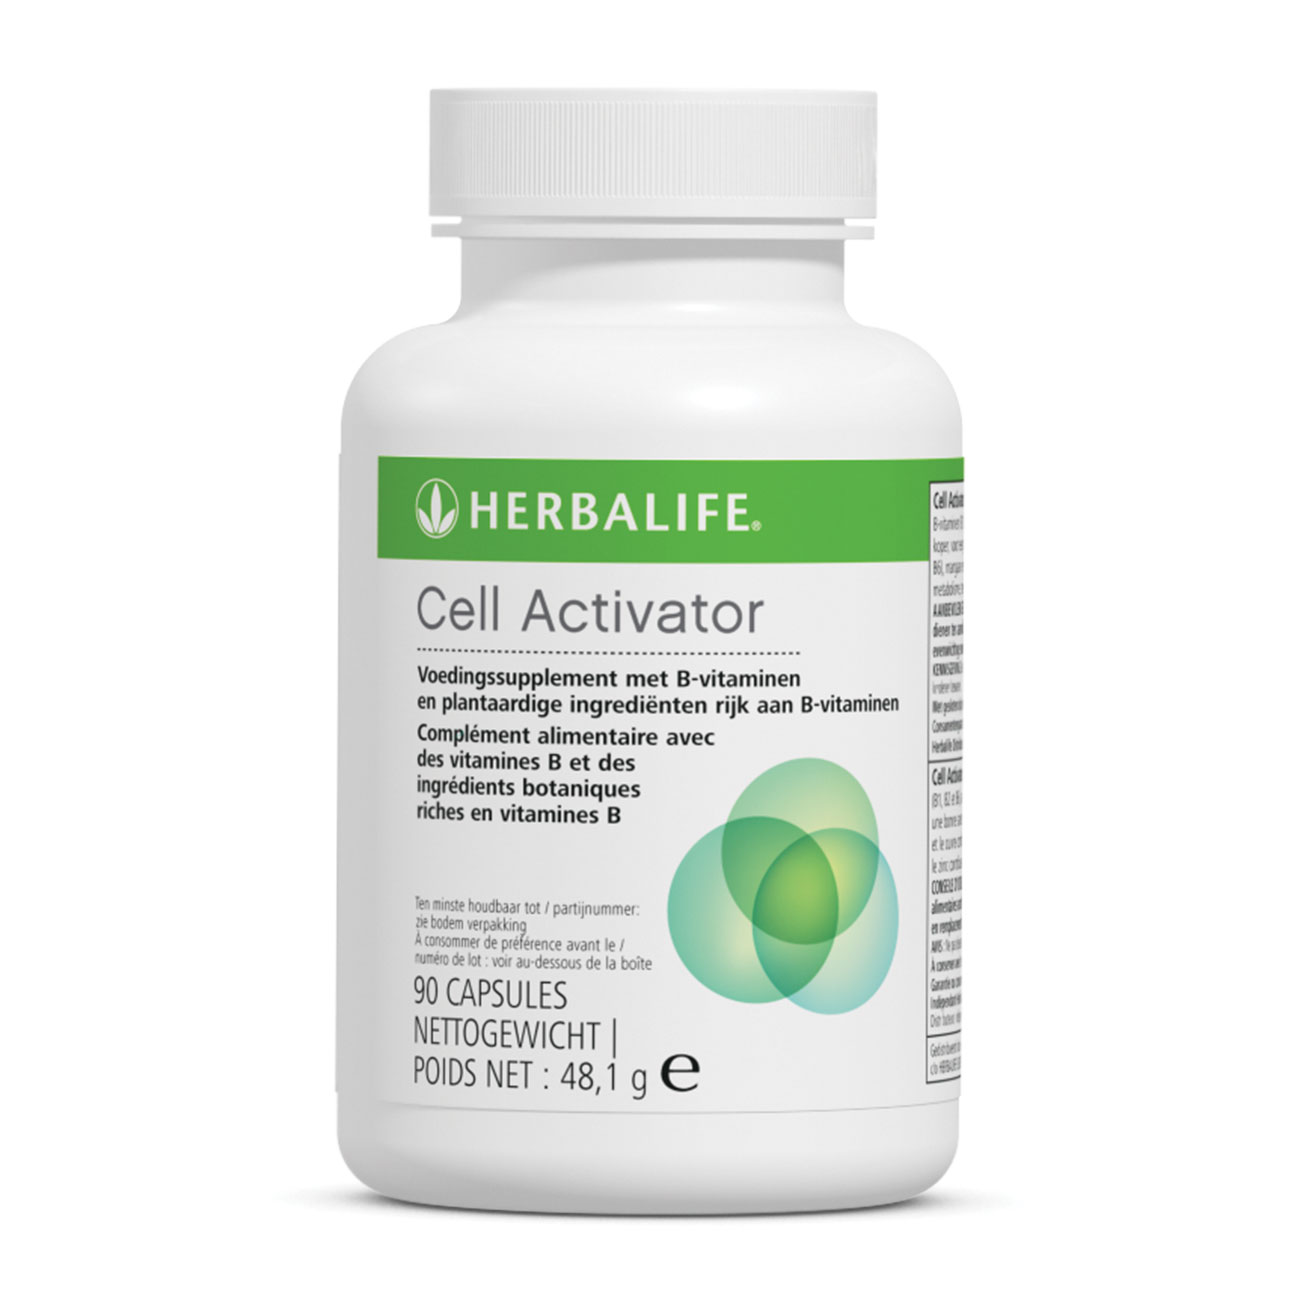 Cell activator Riche en vitamines B product shot